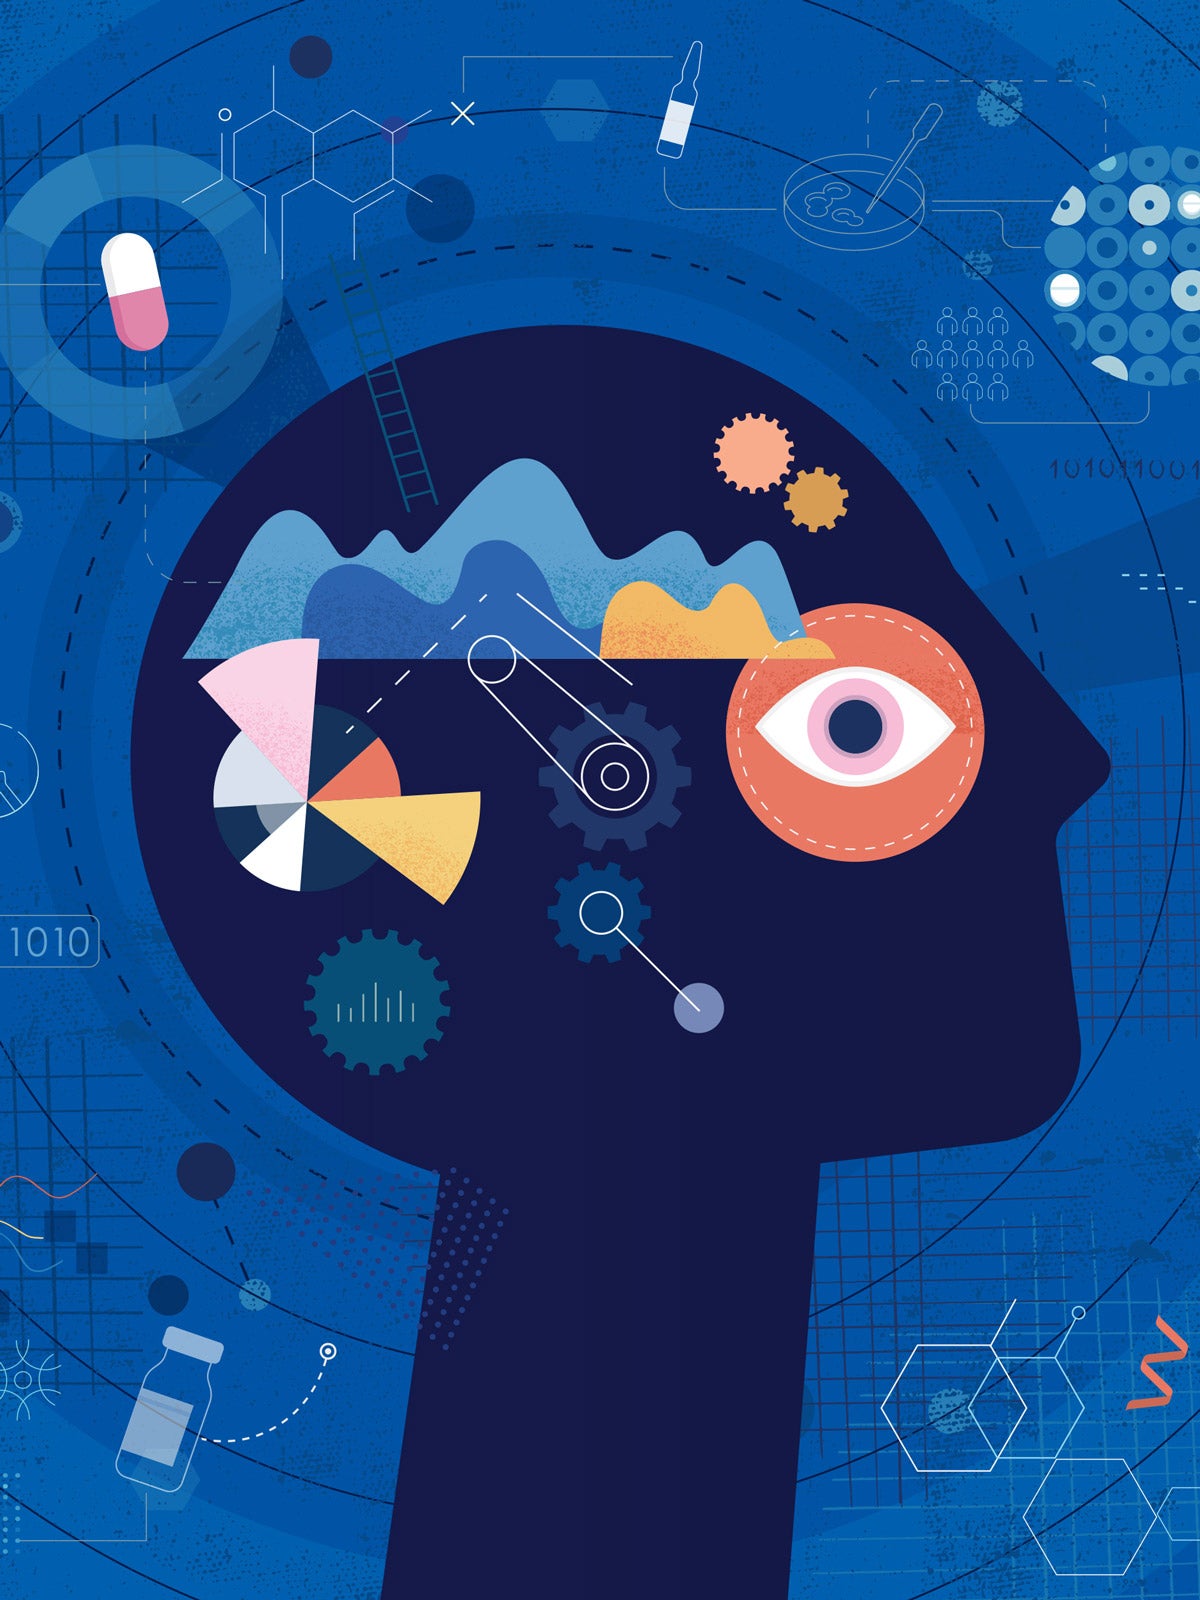 Illustration: Shapes, gears, pills, circles, and DNA strands and other patterns on a blue background. A navy blue profile of a head is in the center and interacts with the background.